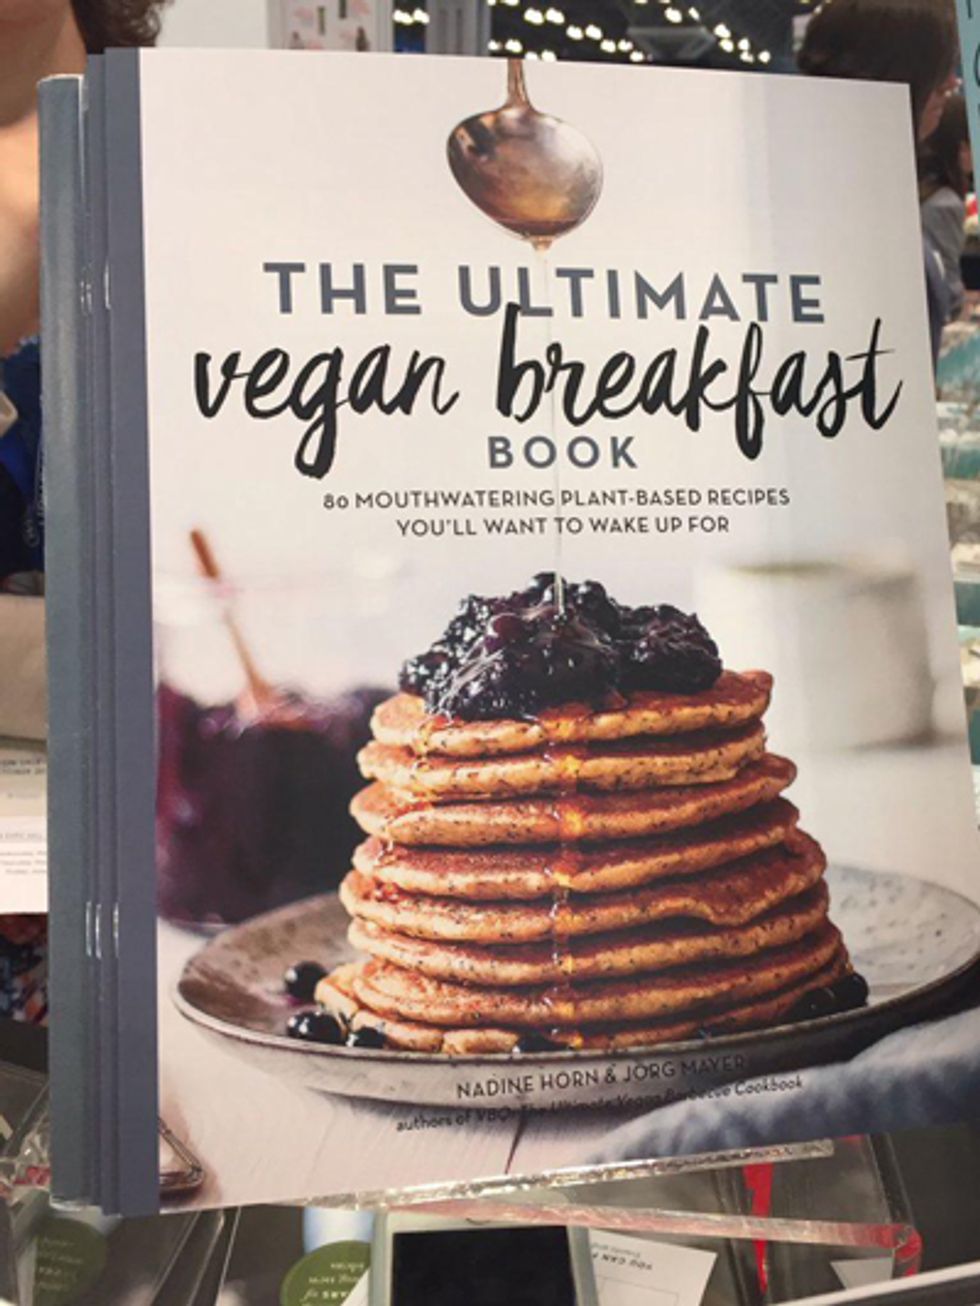 Are you a vegan? There are so many new veggie cookbooks.